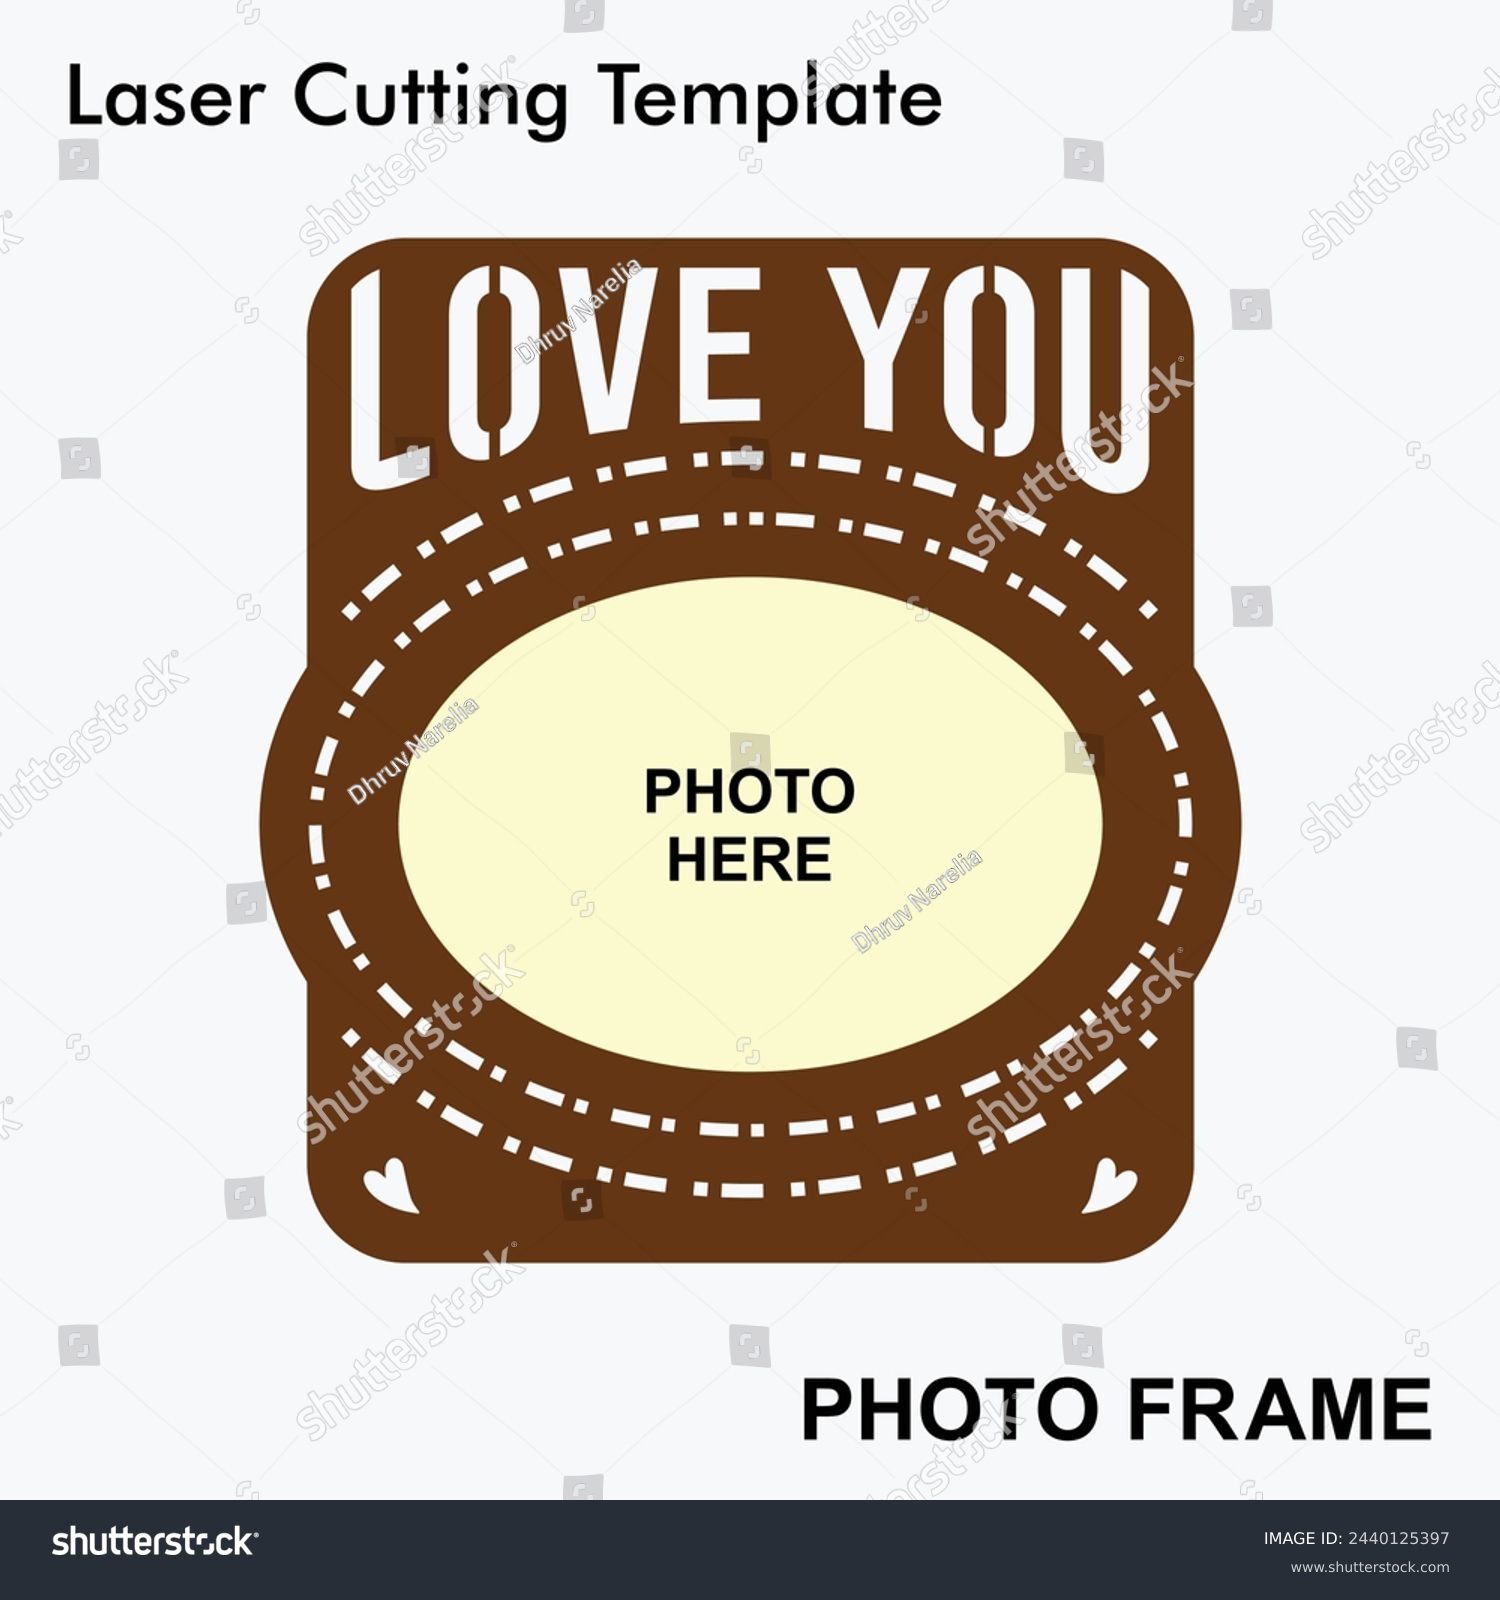 SVG of Love You laser cut photo frame with 1 photo. Home decor wooden sublimation frame template. Suitable for wedding and anniversary gifts. Laser cut photo frame template for mdf and acrylic cutting. svg